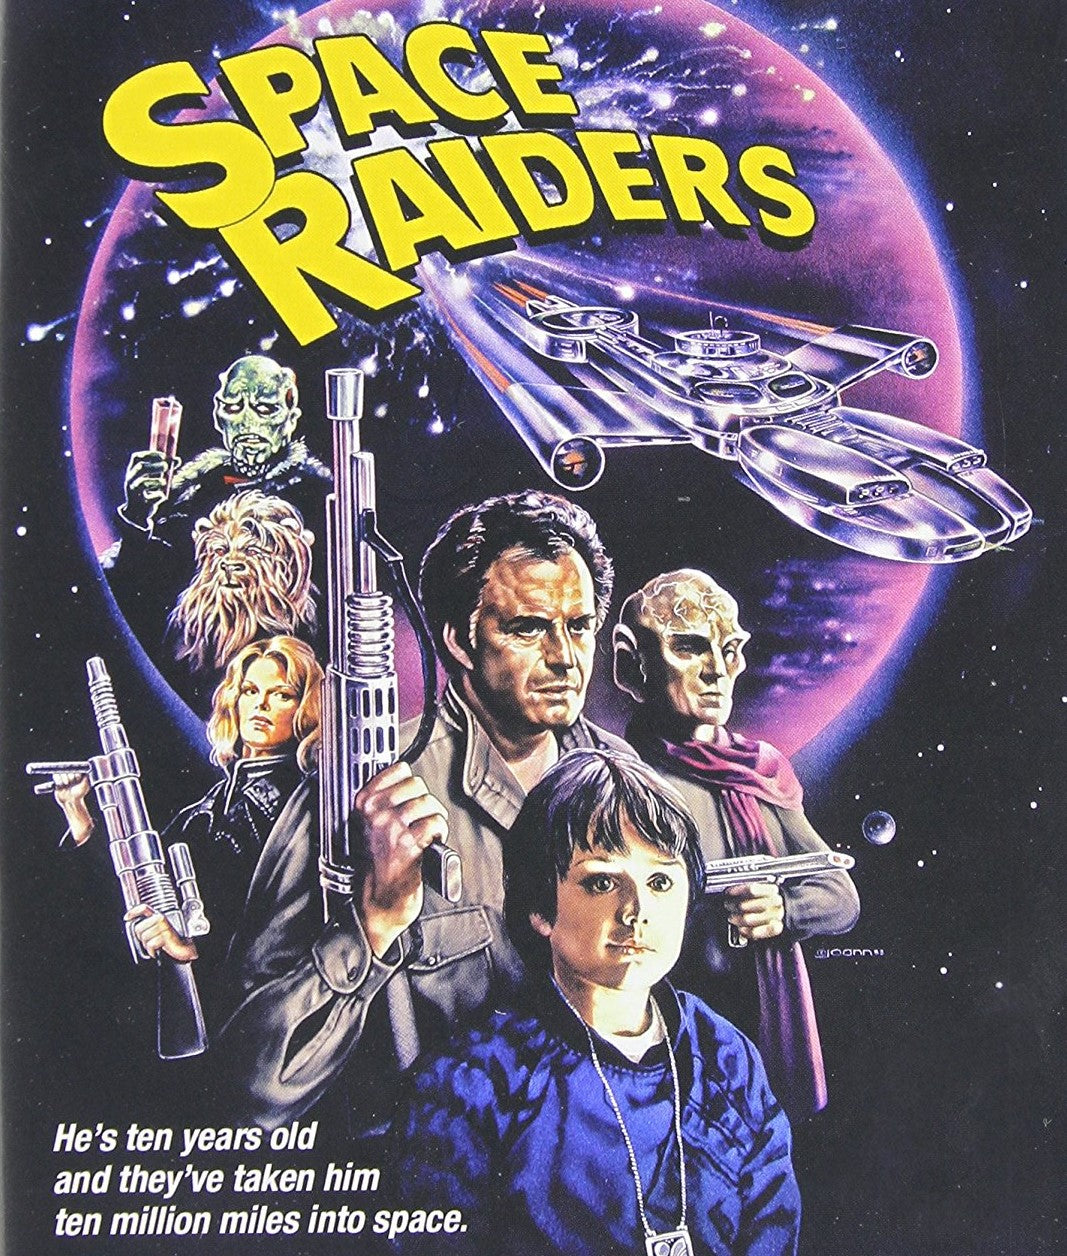 Space Raiders (Limited Dition) Blu-Ray Blu-Ray